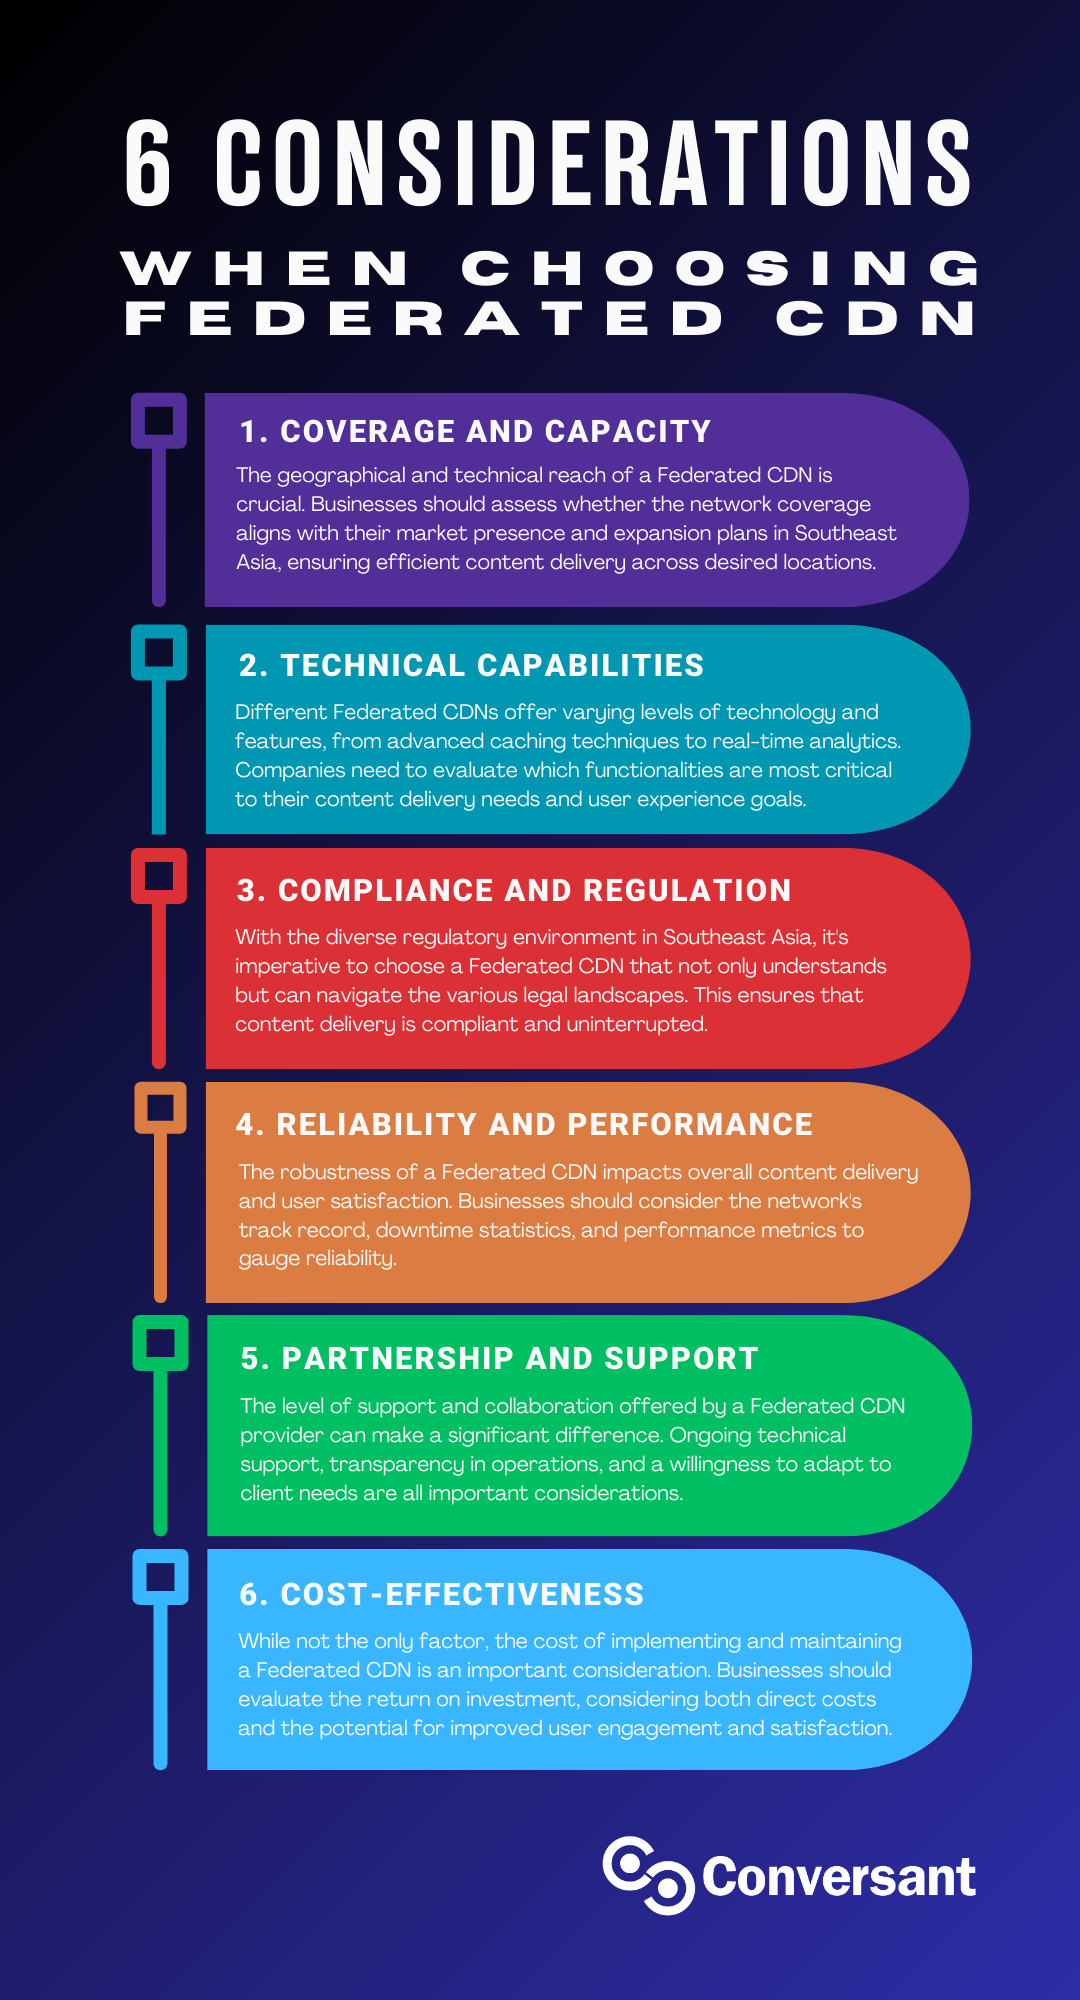 Infographic on 6 considerations when choosing federated cdn